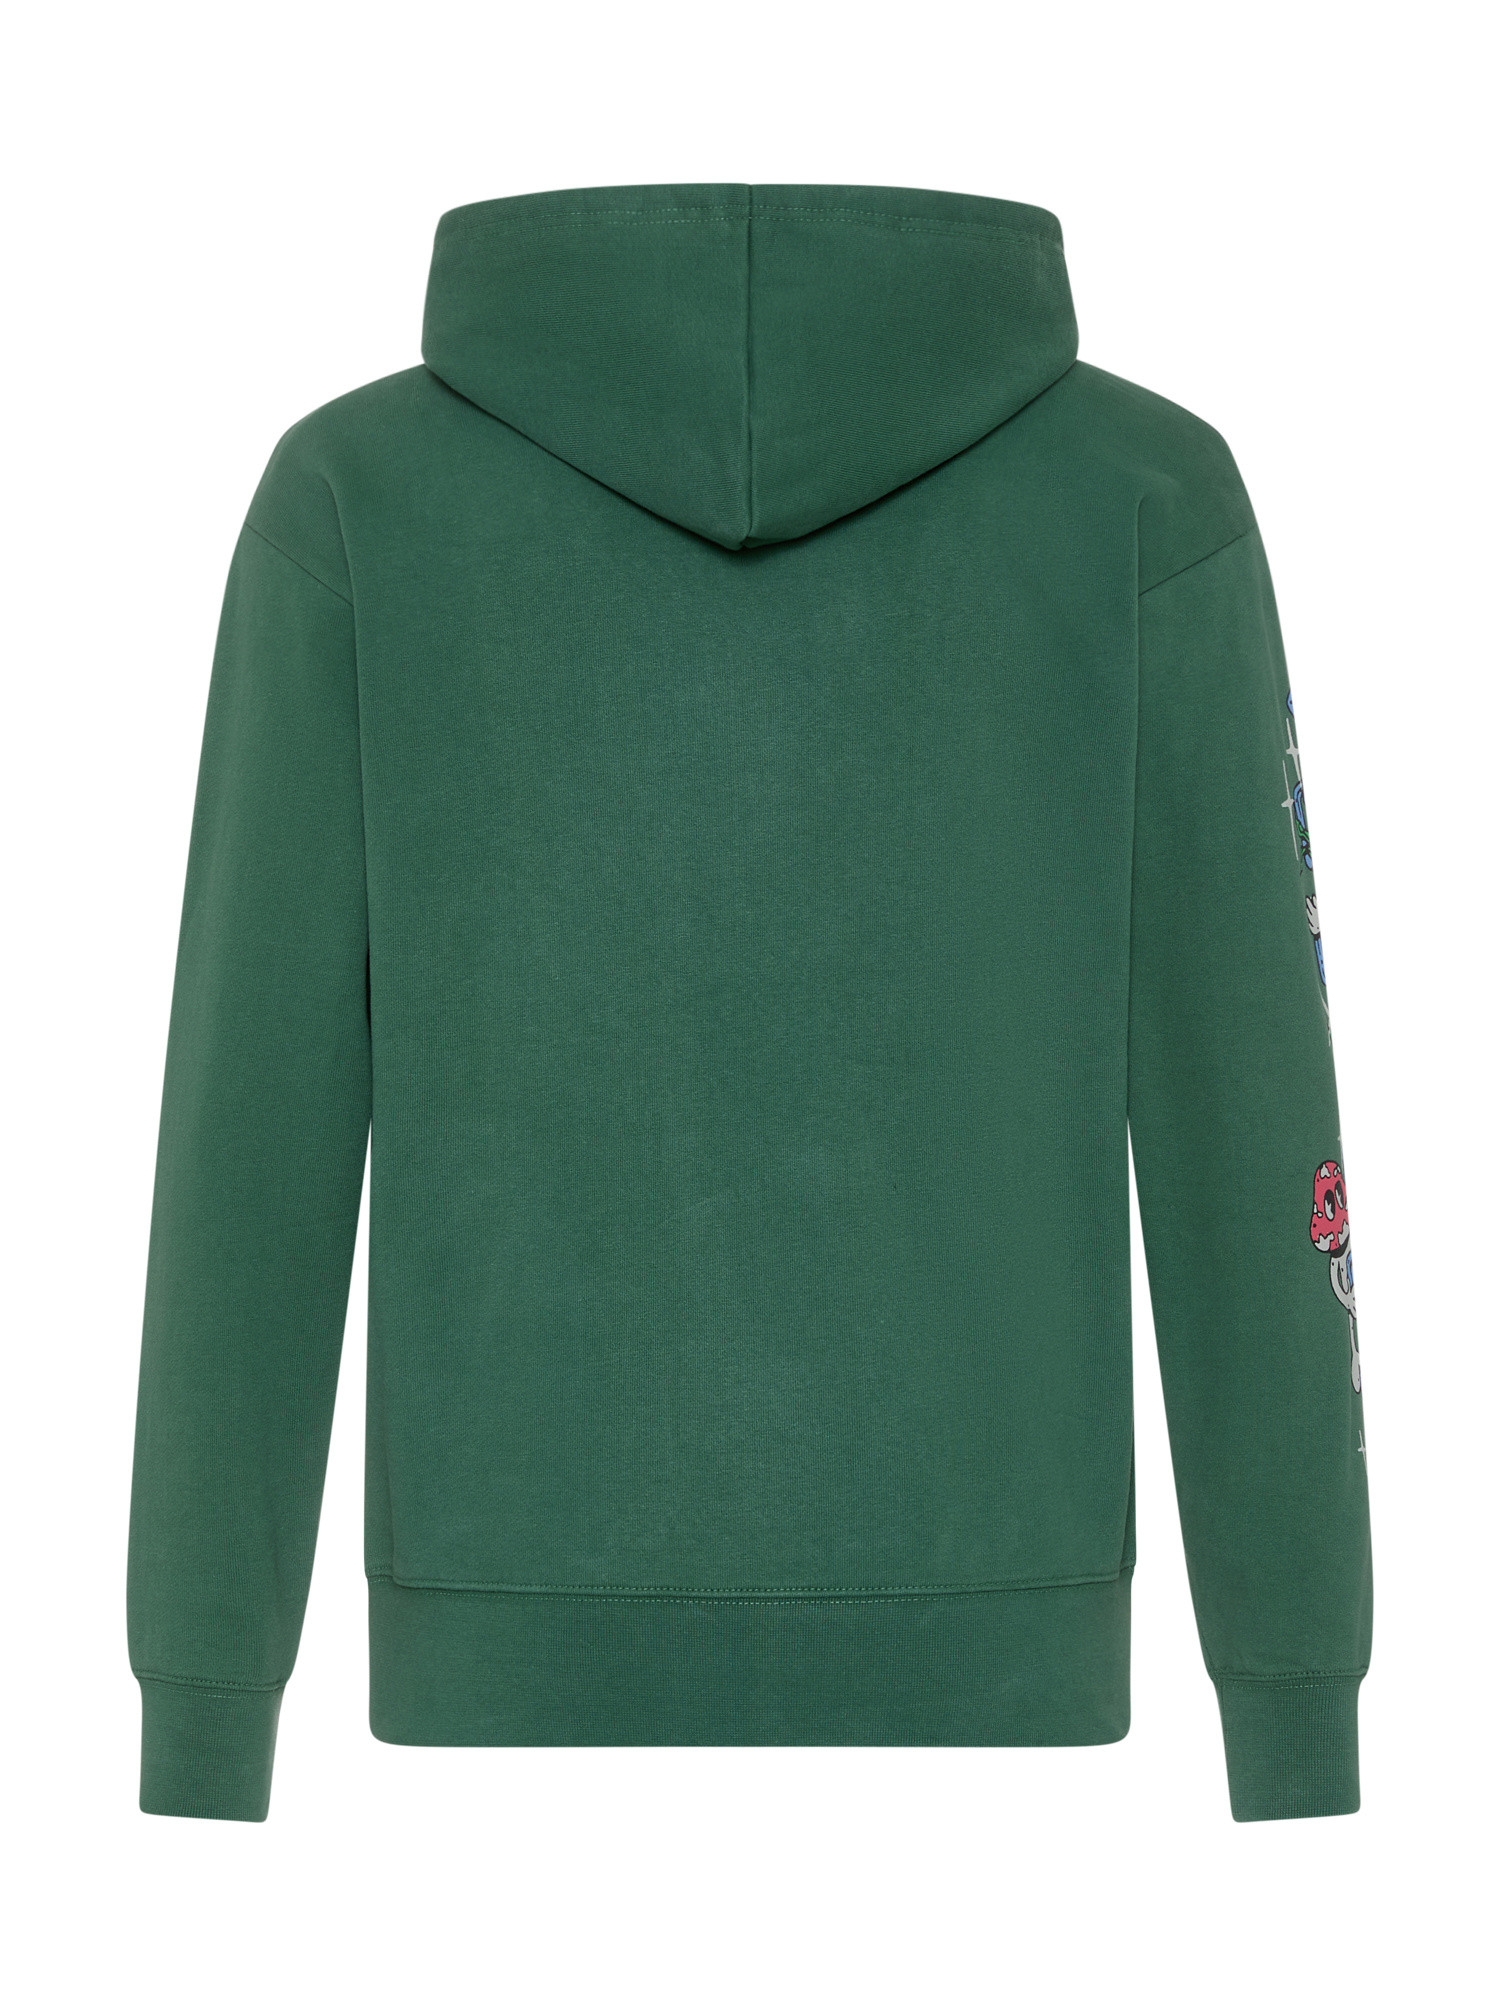 Market - Hooded sweatshirt with print, Green, large image number 1